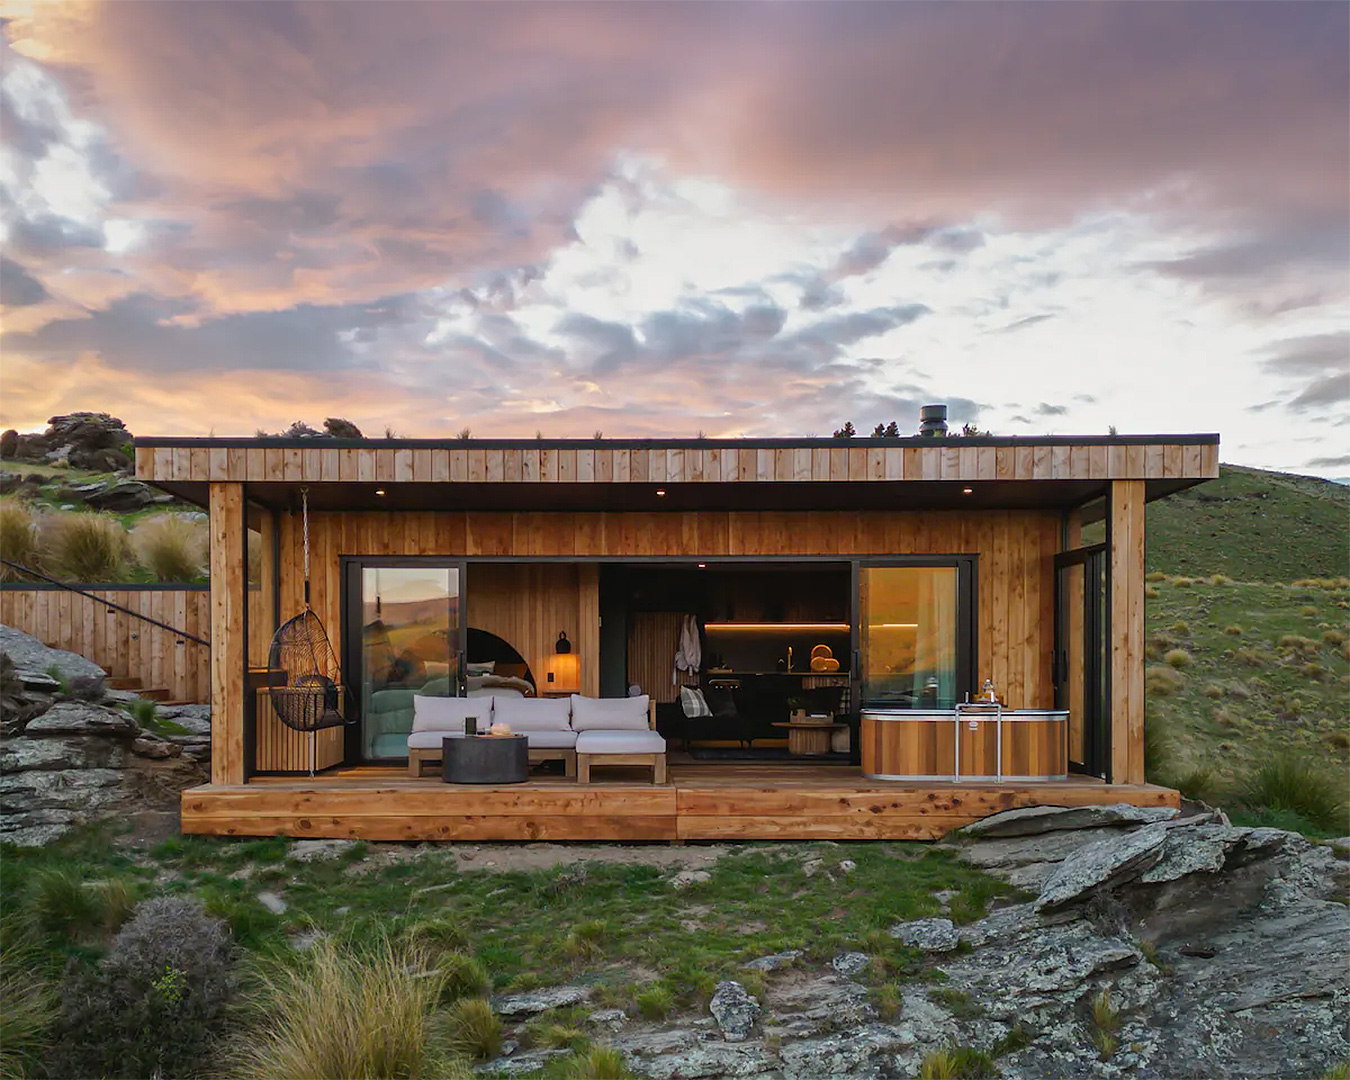 A rectangular, wooden retreat house set on rocks and surrounded by green hills.